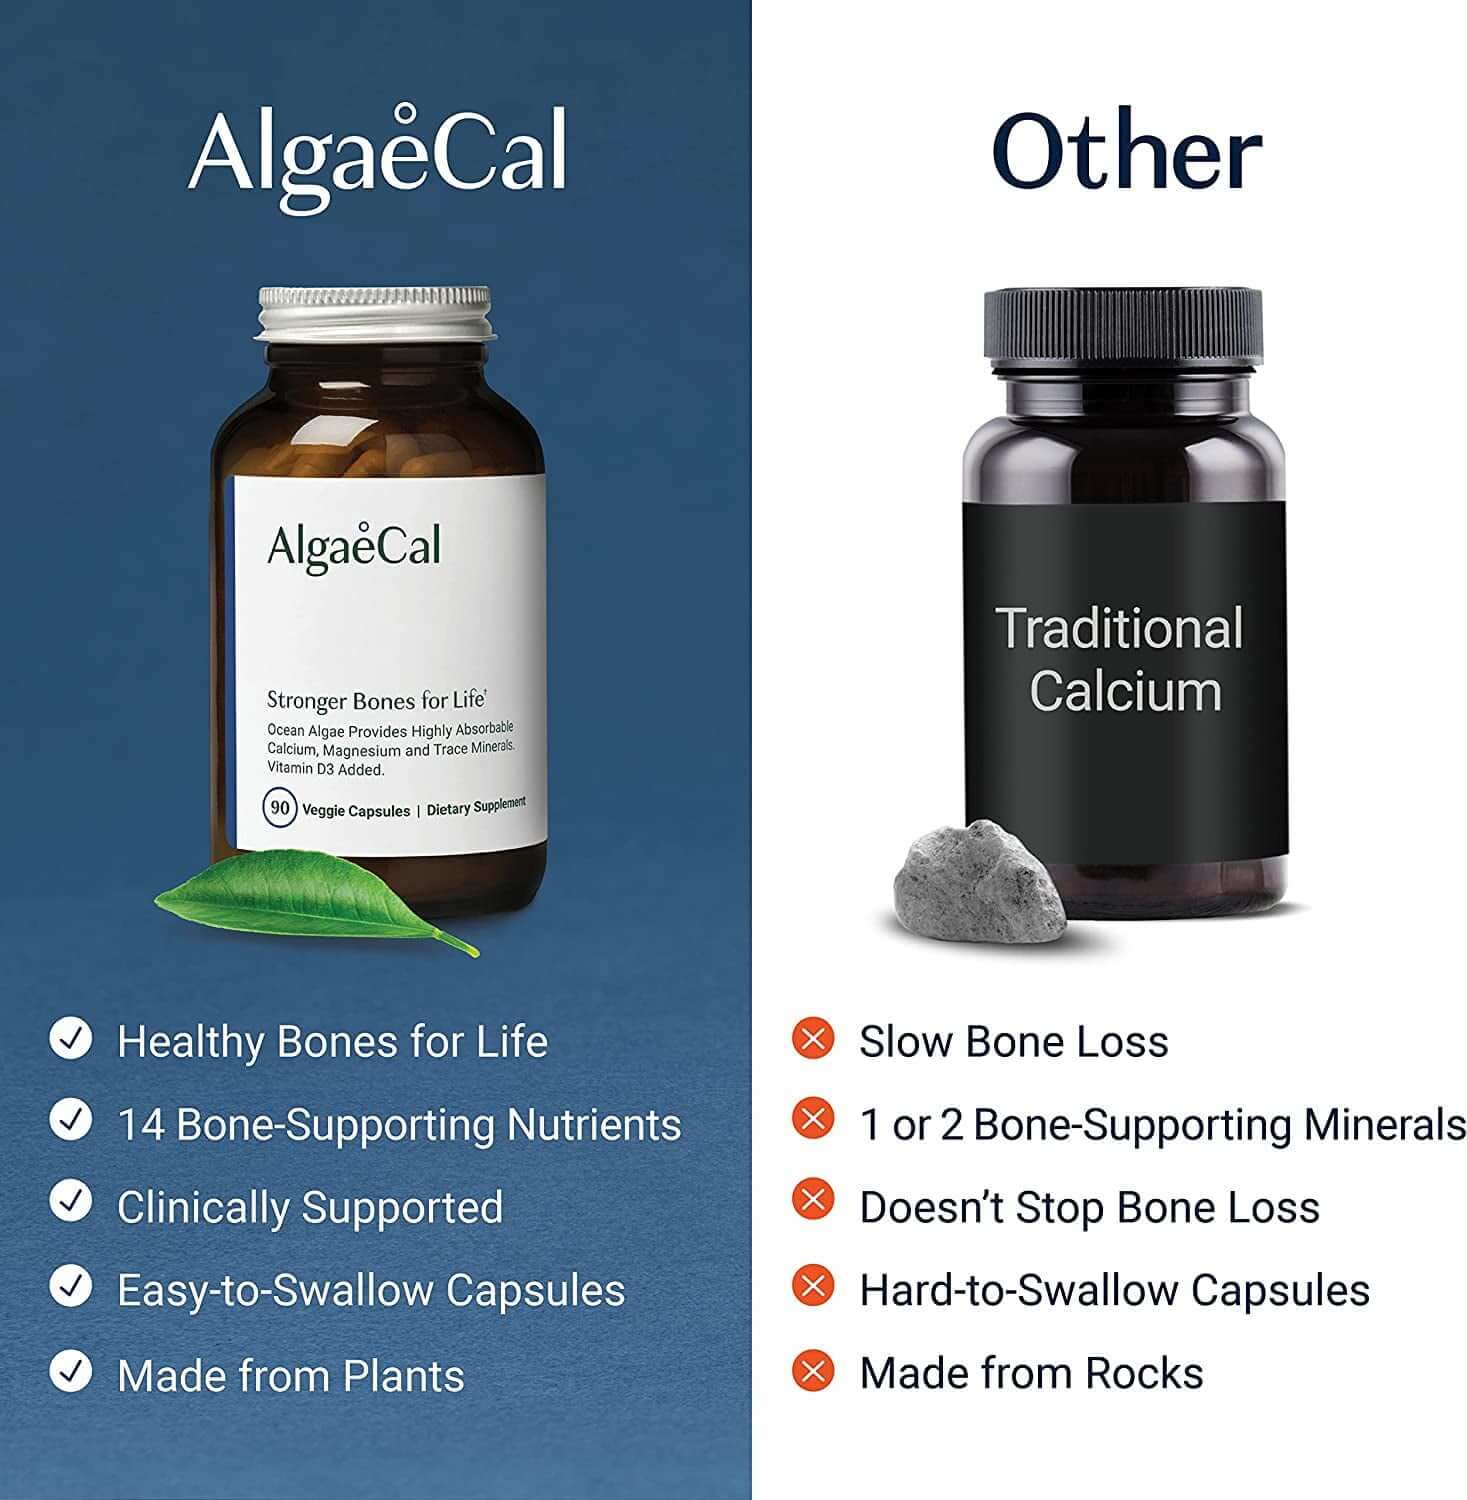 Algaecal - Plant Based Calcium Supplement with Vitamin D3 (1000 IU) for Bone Strength, Contains 13 Trace Minerals Supporting Bone Health, Organic Calcium for Women & Men, 3 Month Supply - vitamenstore.com